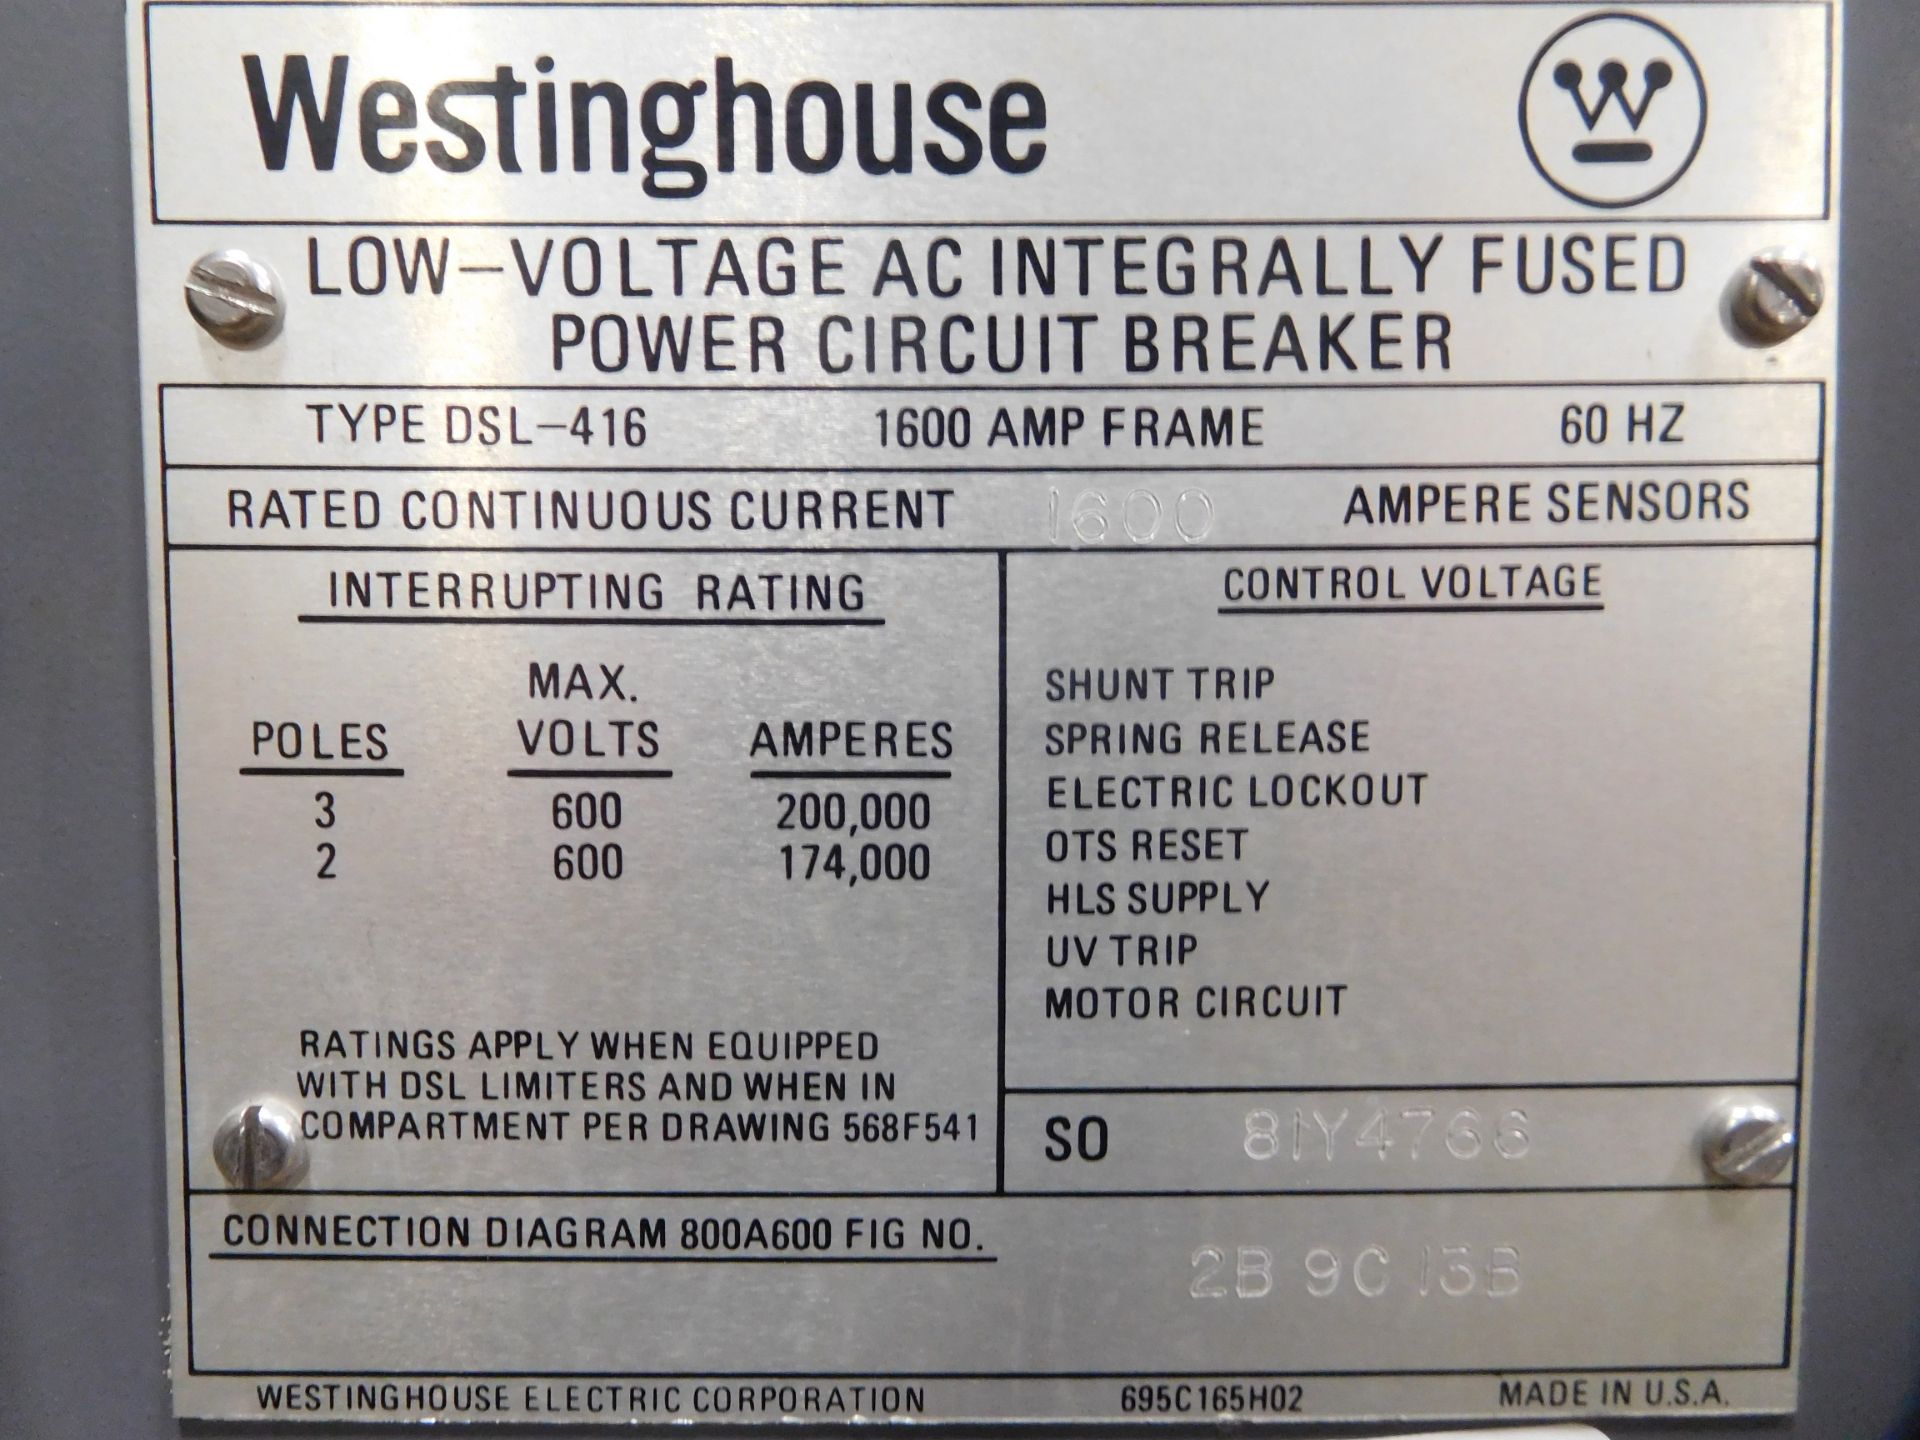 Westinghouse DSL-416 1600 Amp Low-Voltage AC Integrally Fused Power Circuit Breaker - Image 2 of 9